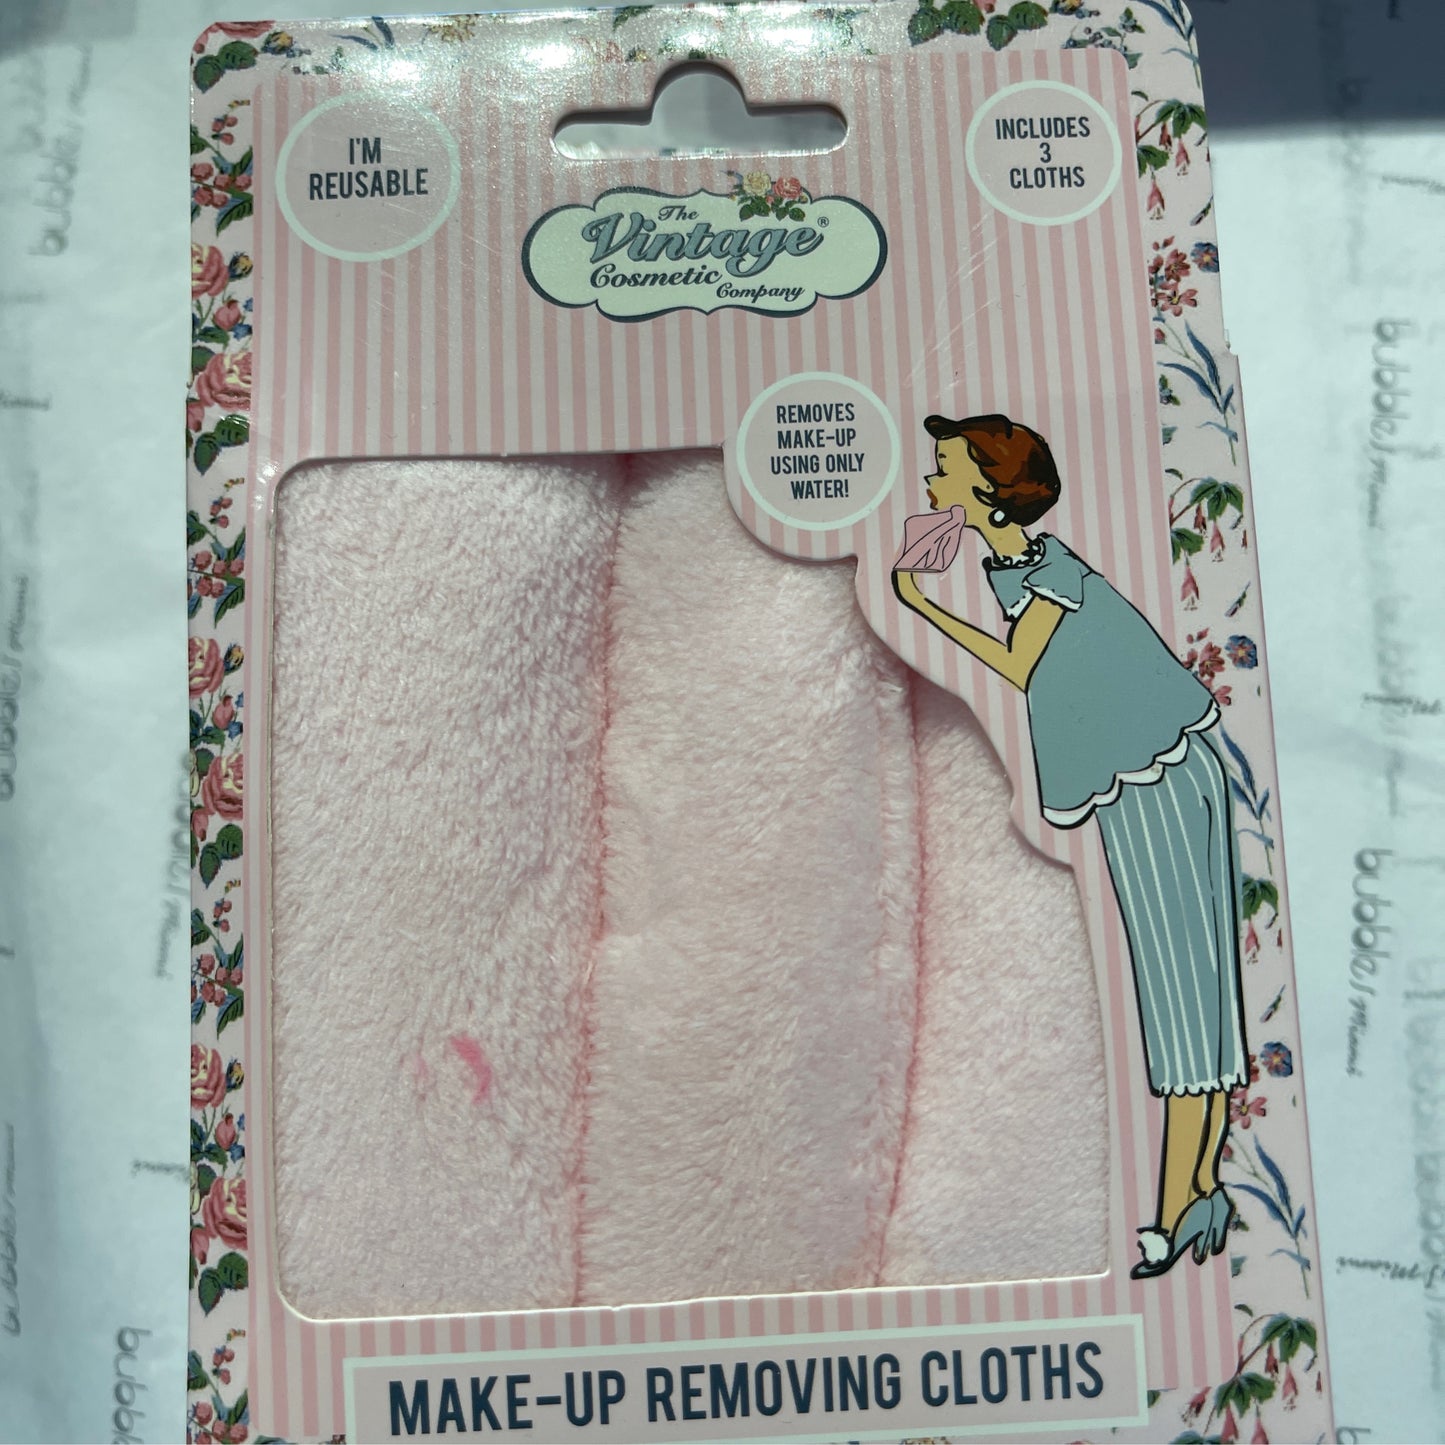 THE VINTAGE COSMETIC MAKE UP REMOVING CLOTHS